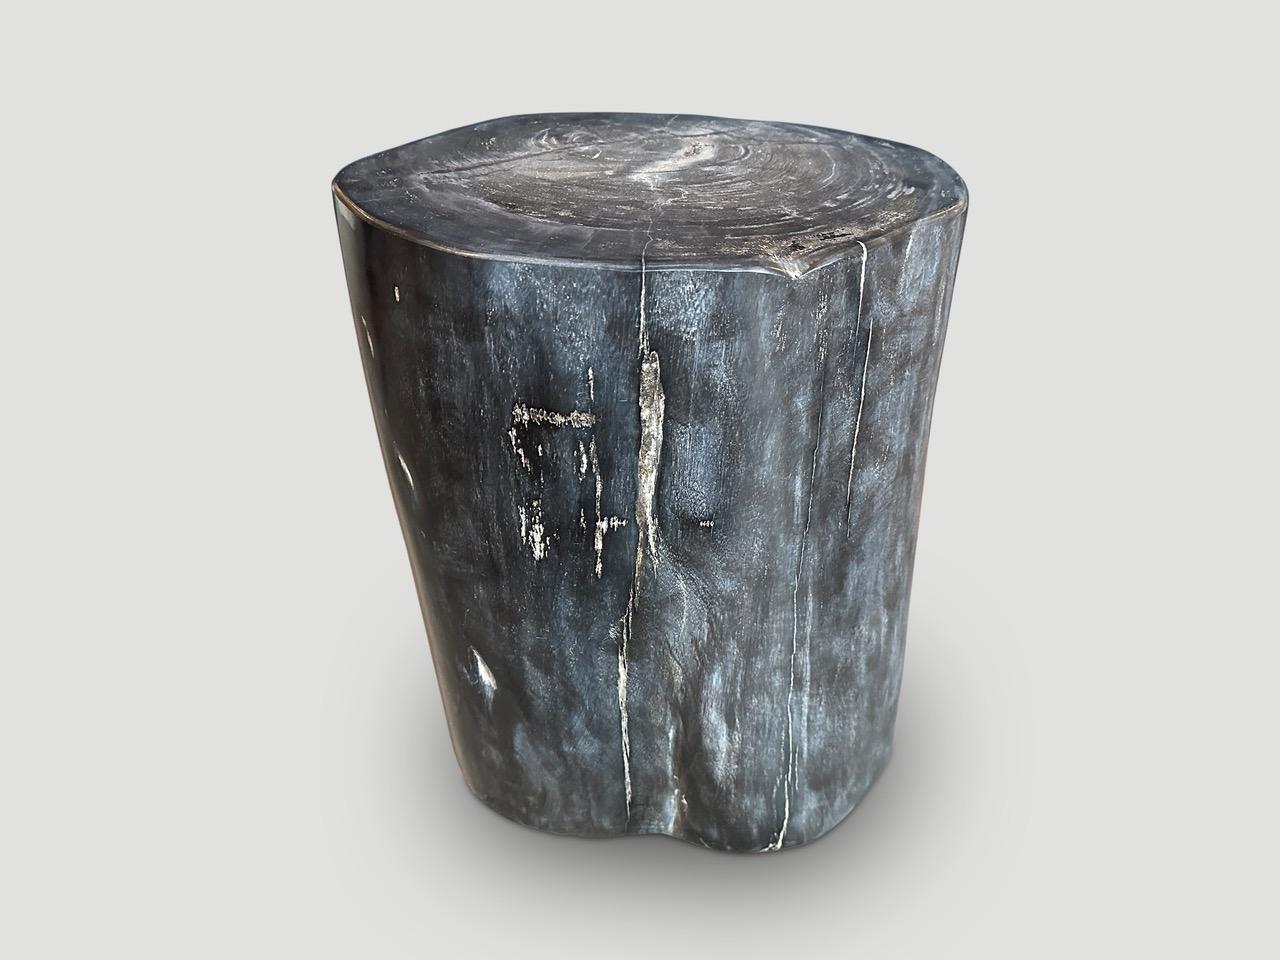 Impressive beautiful grey tones on this high quality super smooth petrified wood side table. It’s fascinating how Mother Nature produces these stunning 40 million year old petrified teak logs with such contrasting colors and natural patterns